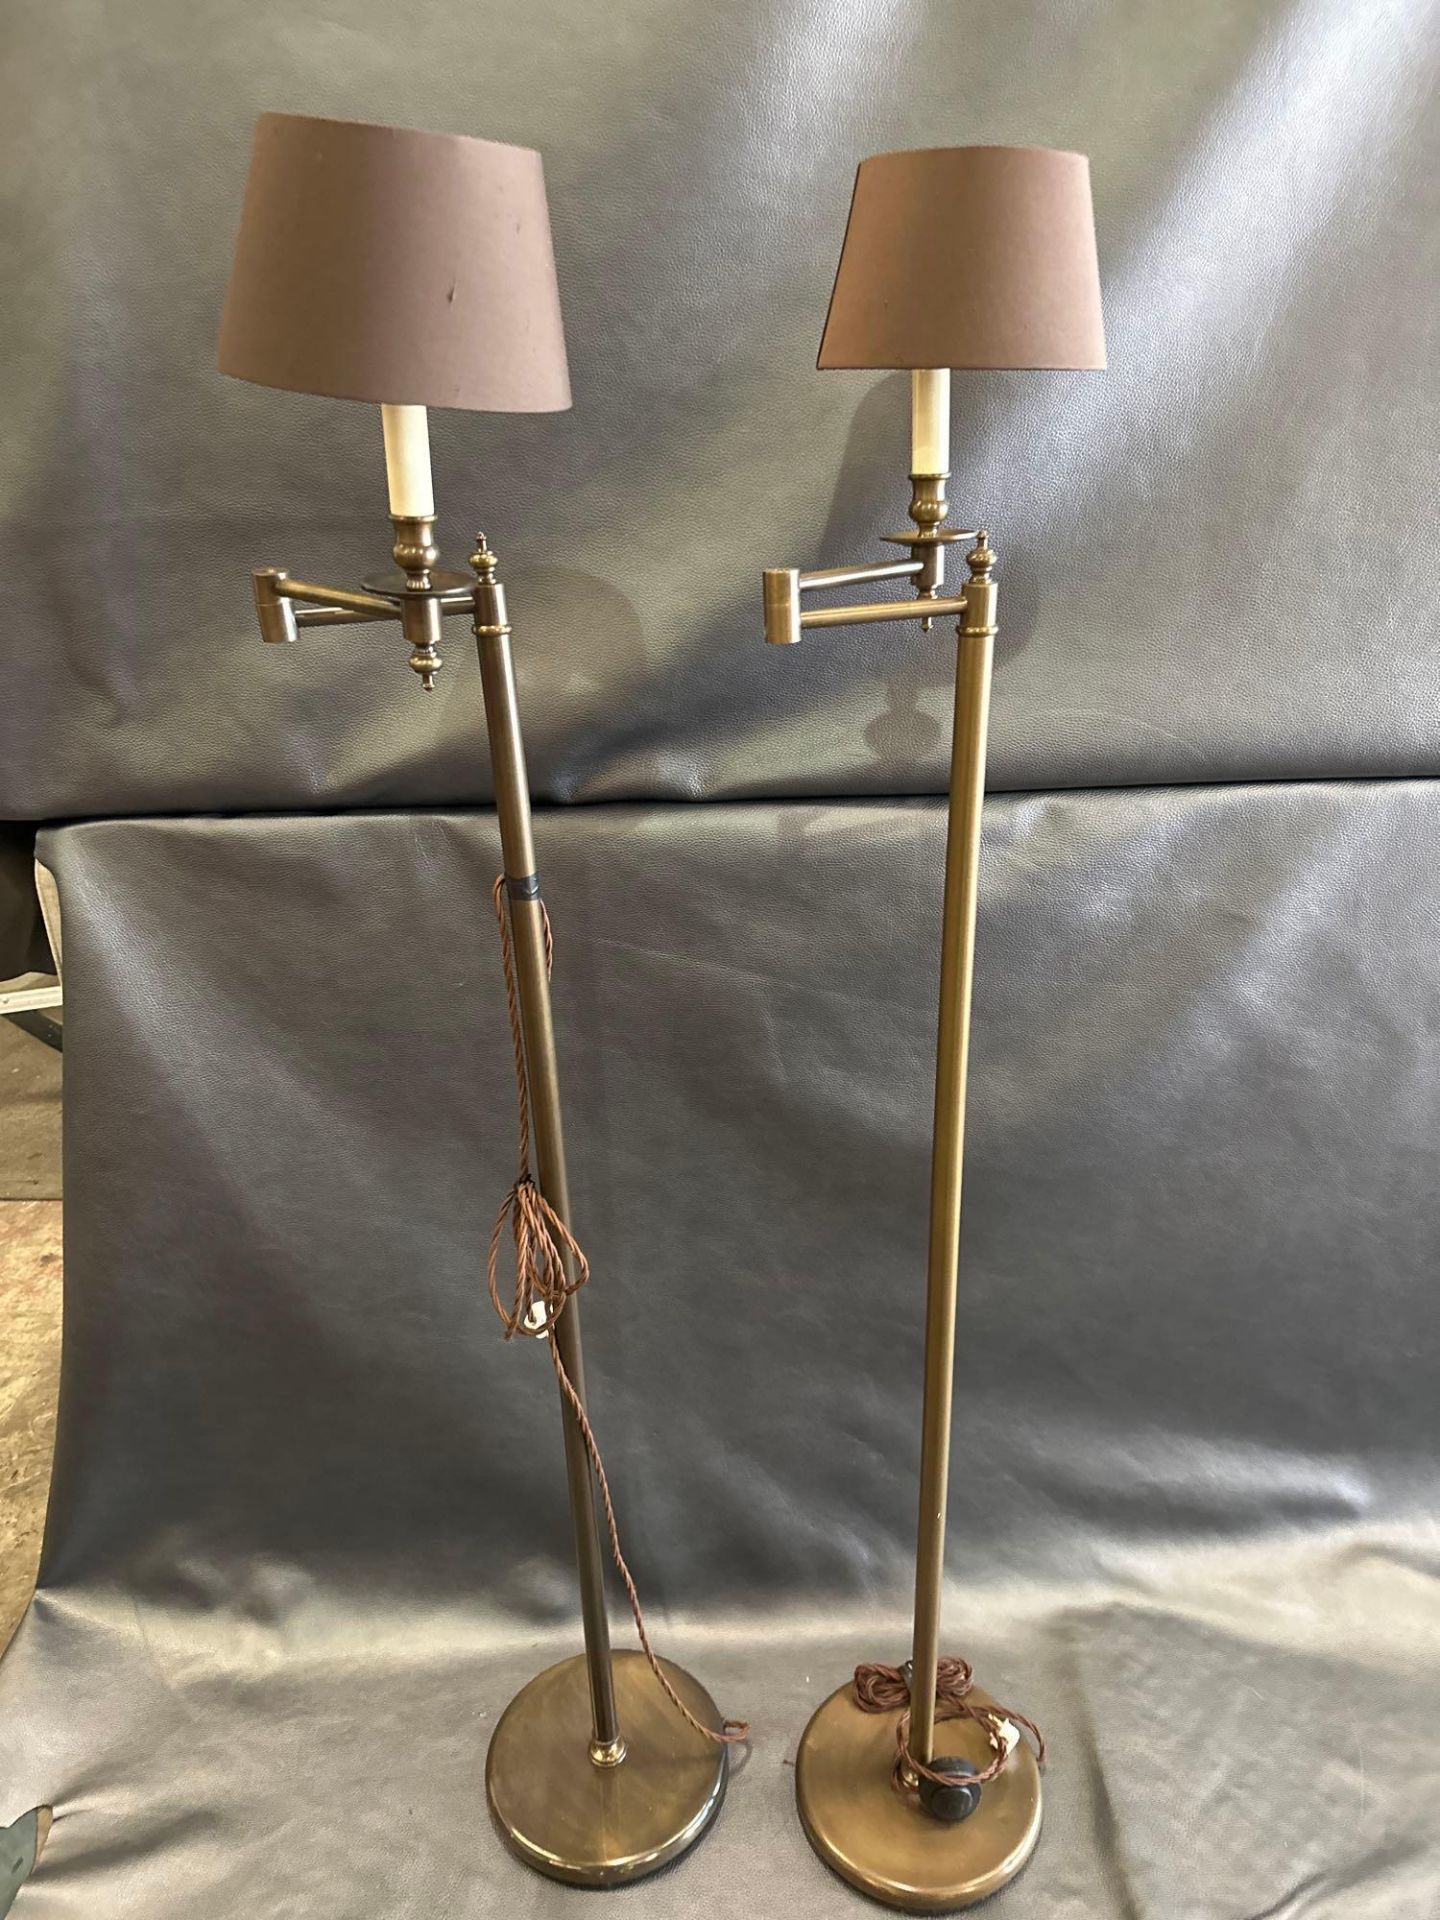 A Pair Library Floor Lamps Finished In English Bronze Swing Arm Function With Shade 156cm - Image 2 of 6